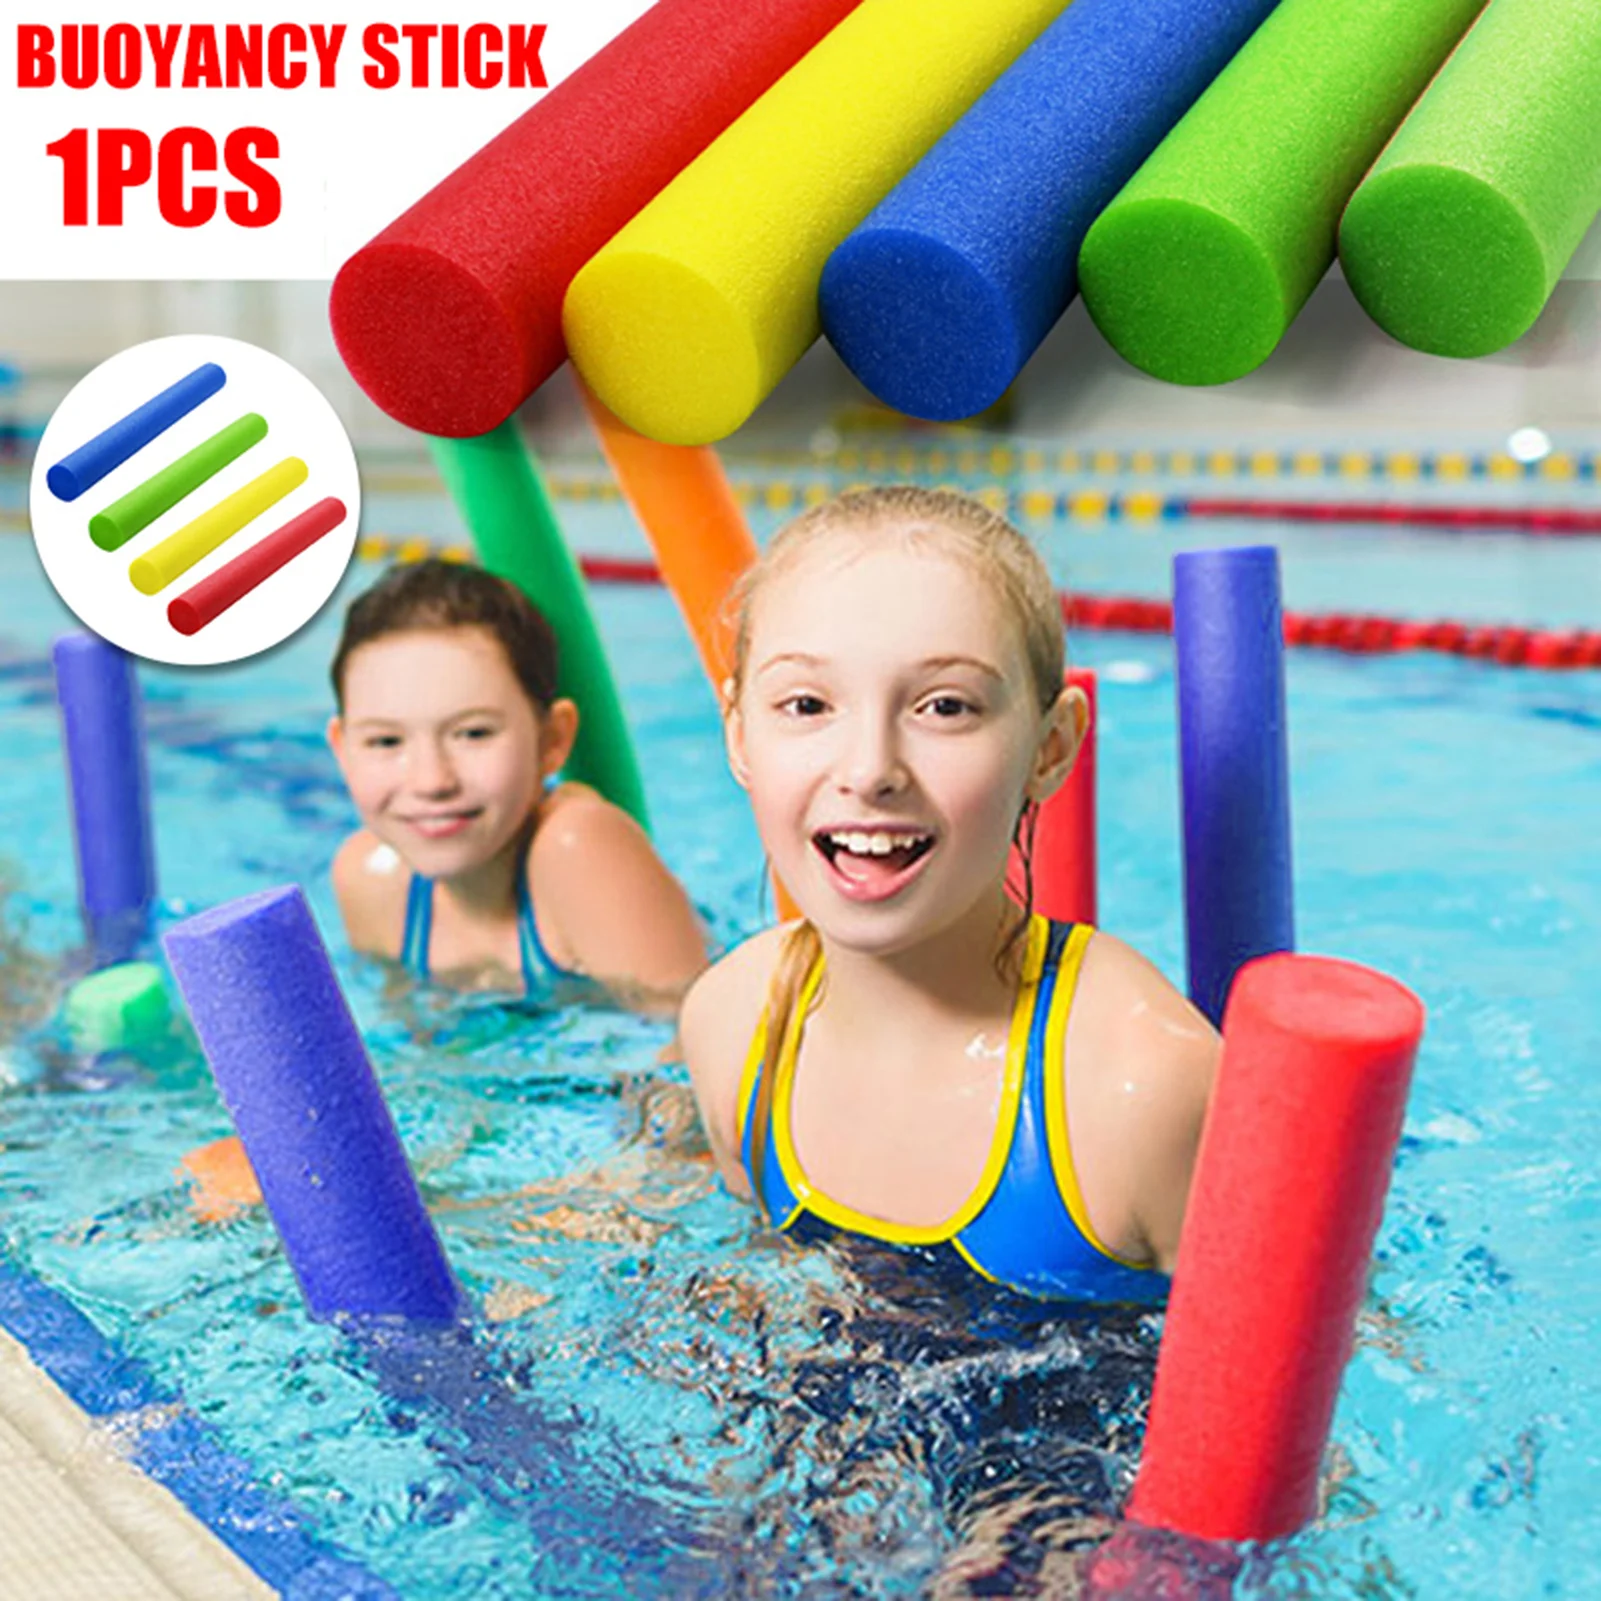 

New Pool Inflatable Sticks Colorful PVC Giant Blow up Pool Float Stick Outdoor Water Games Toy